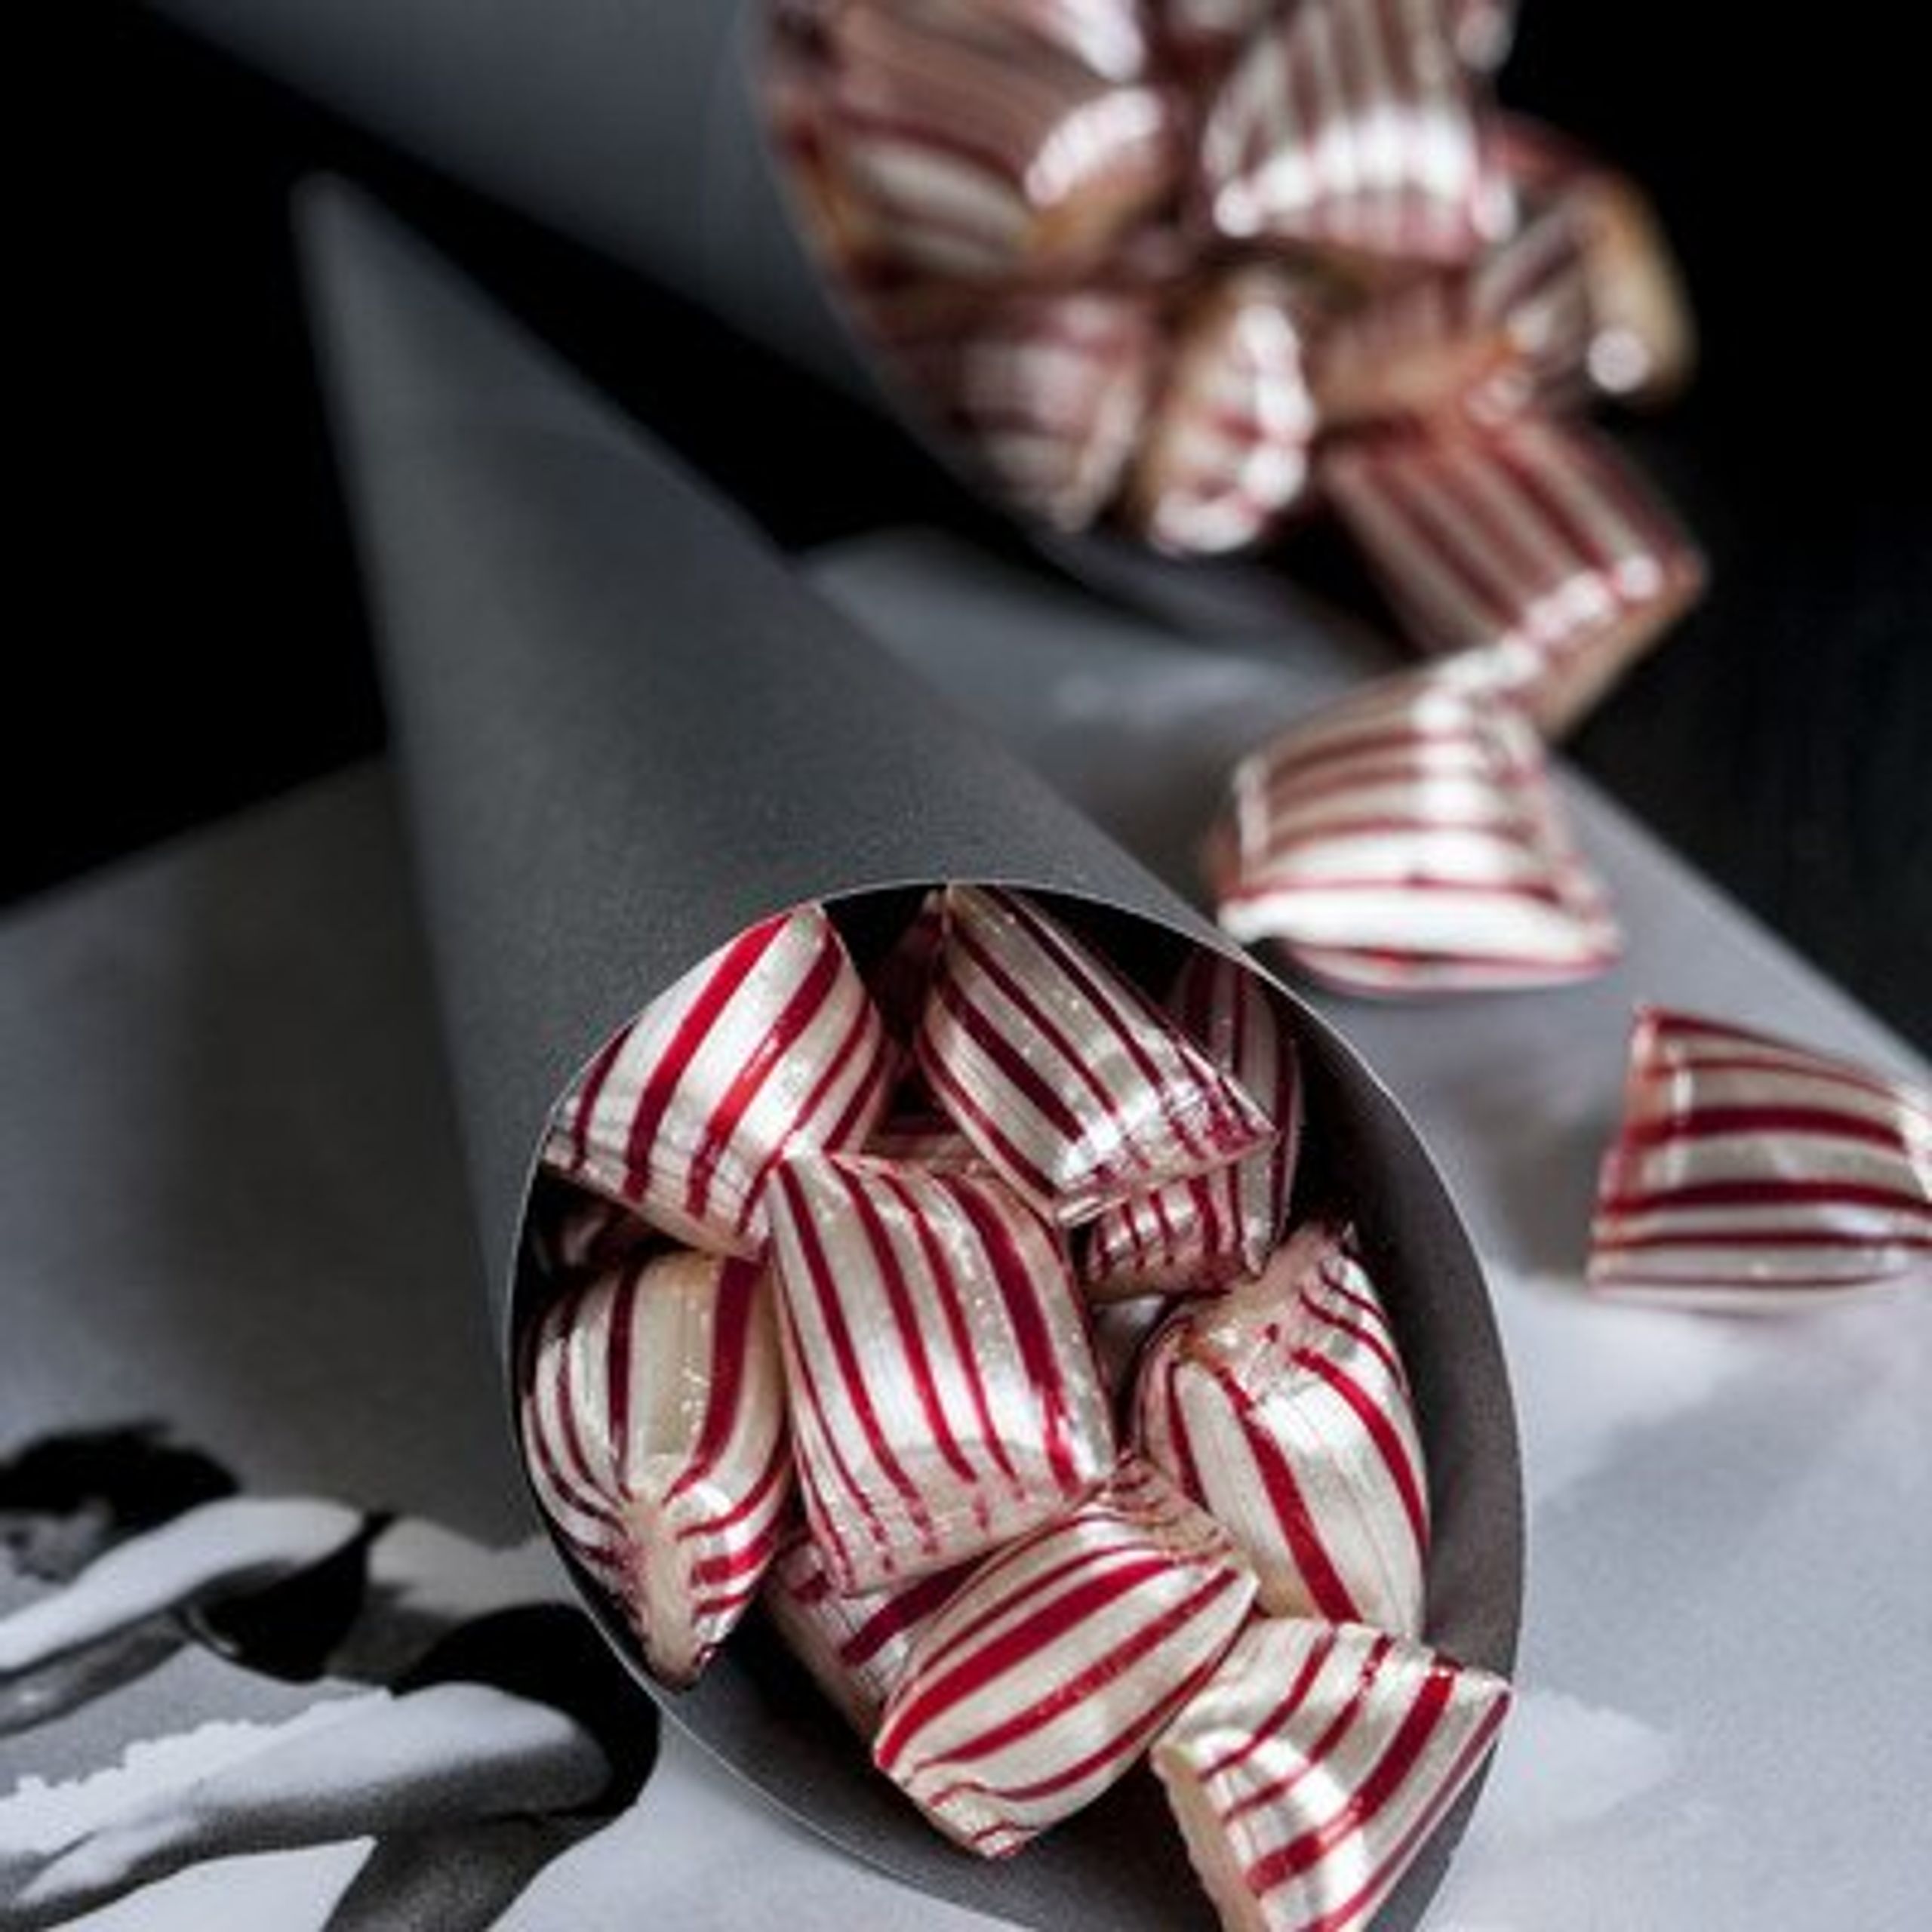 bolcheriet - Sweets - Peppermint Sweets - Peppermint